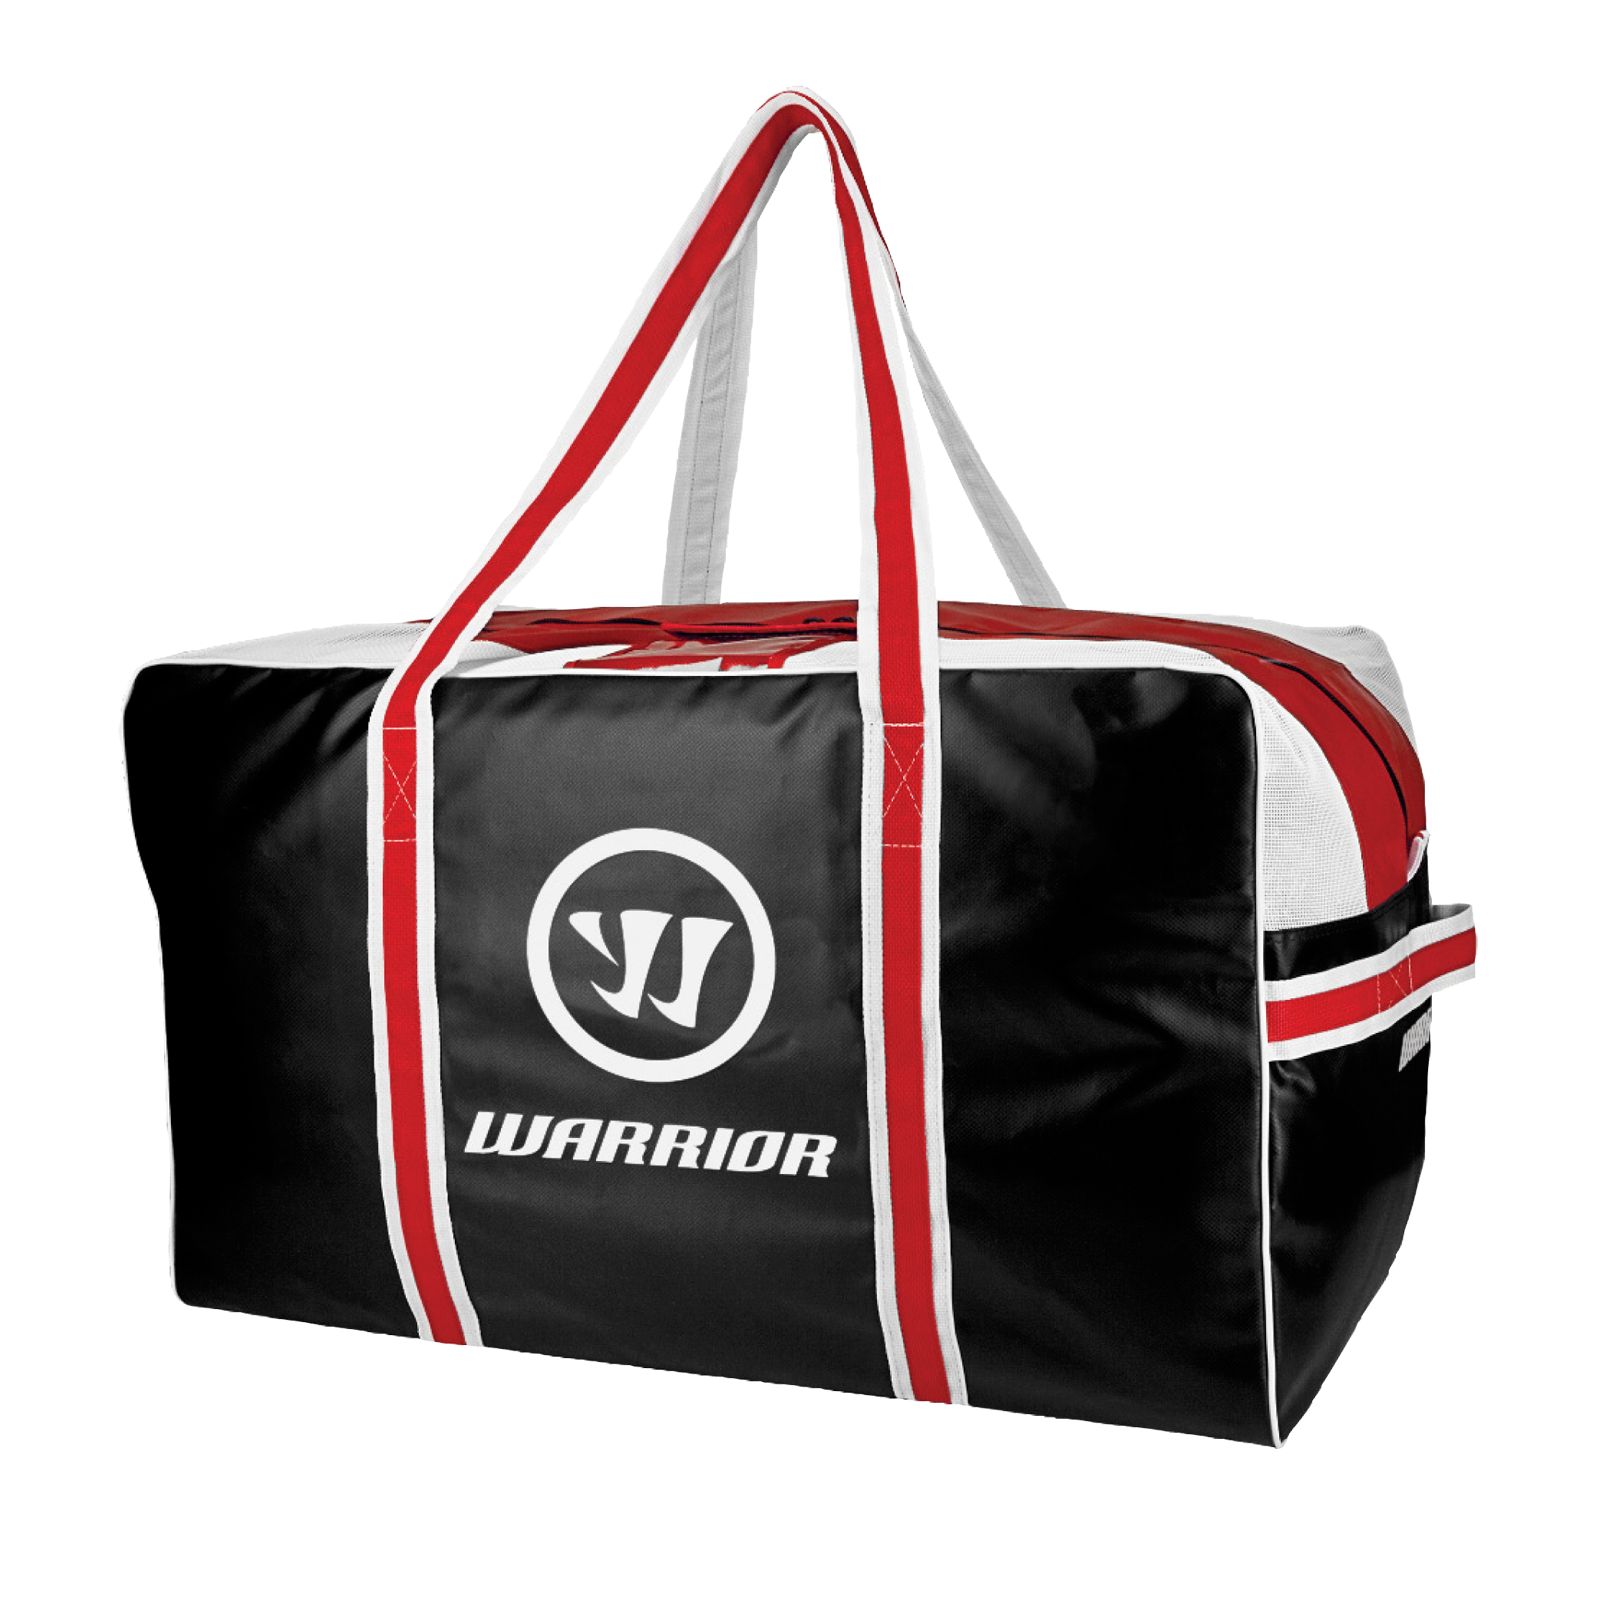 Pro Bag-Small, Black with Red image number 0